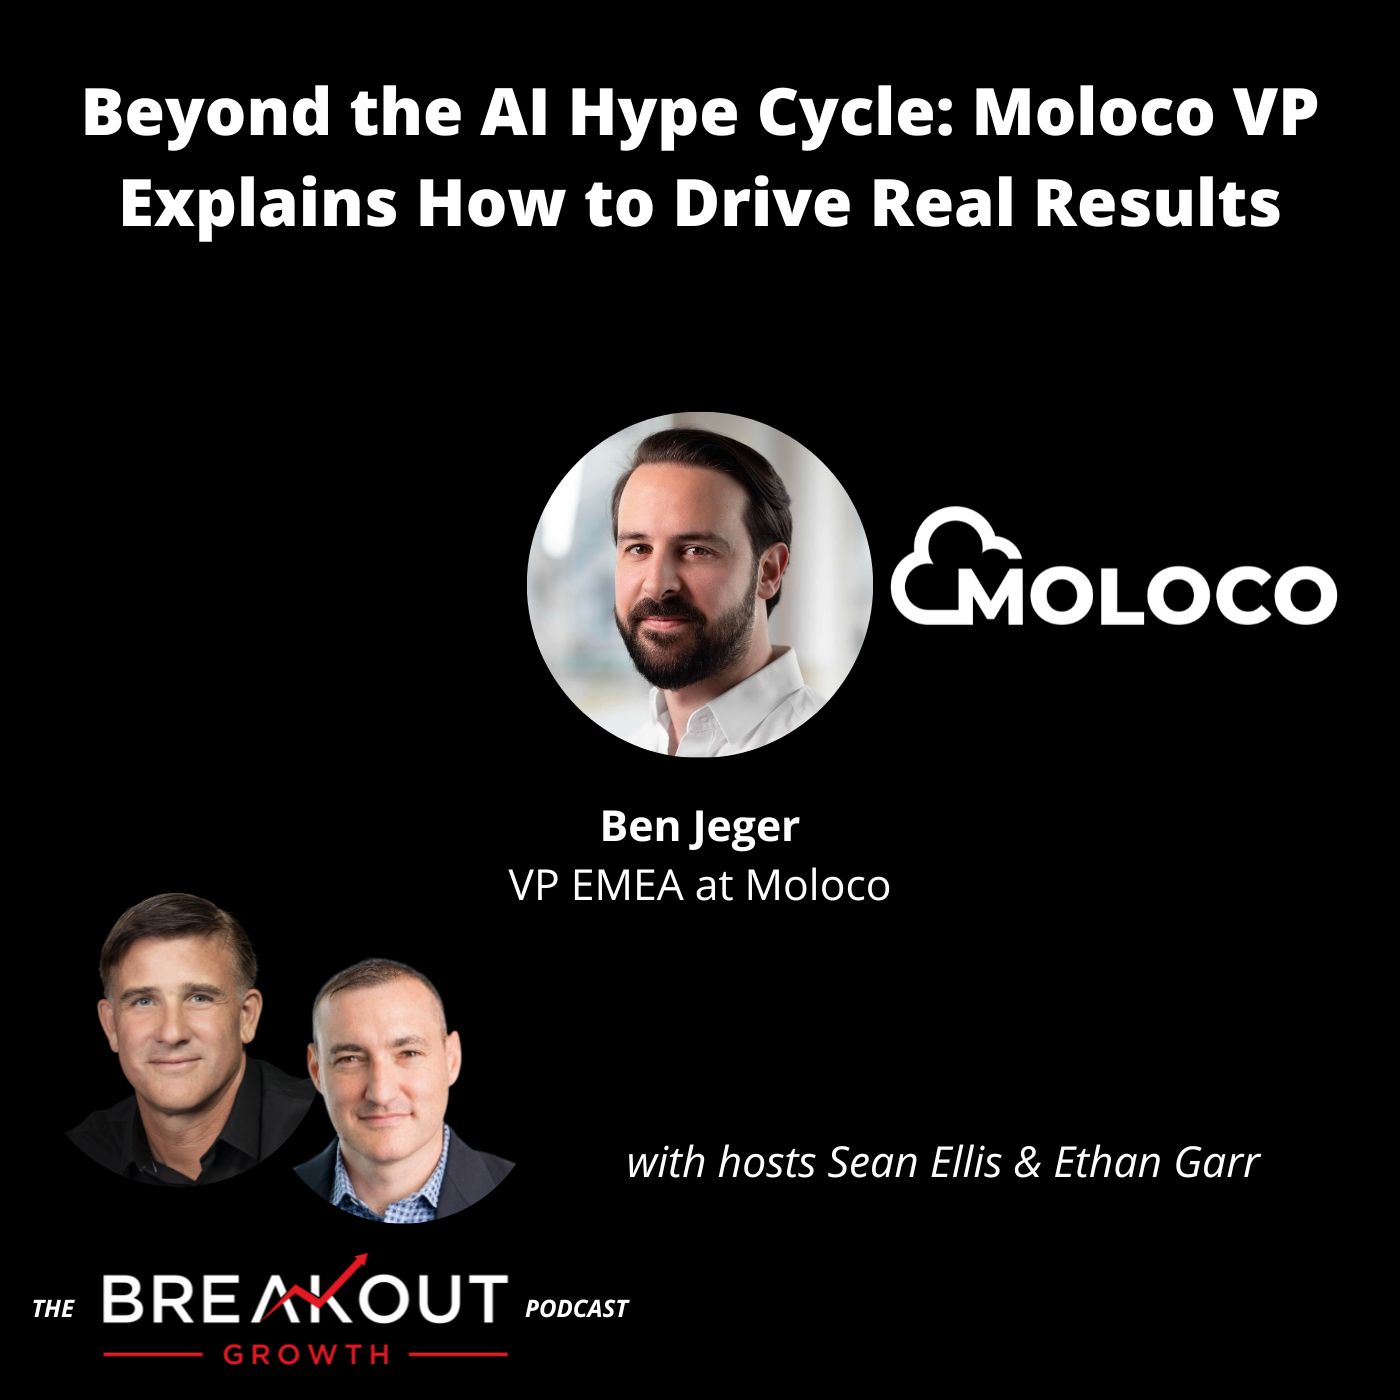 Beyond the AI Hype Cycle: Moloco VP Explains How to Drive Real Results